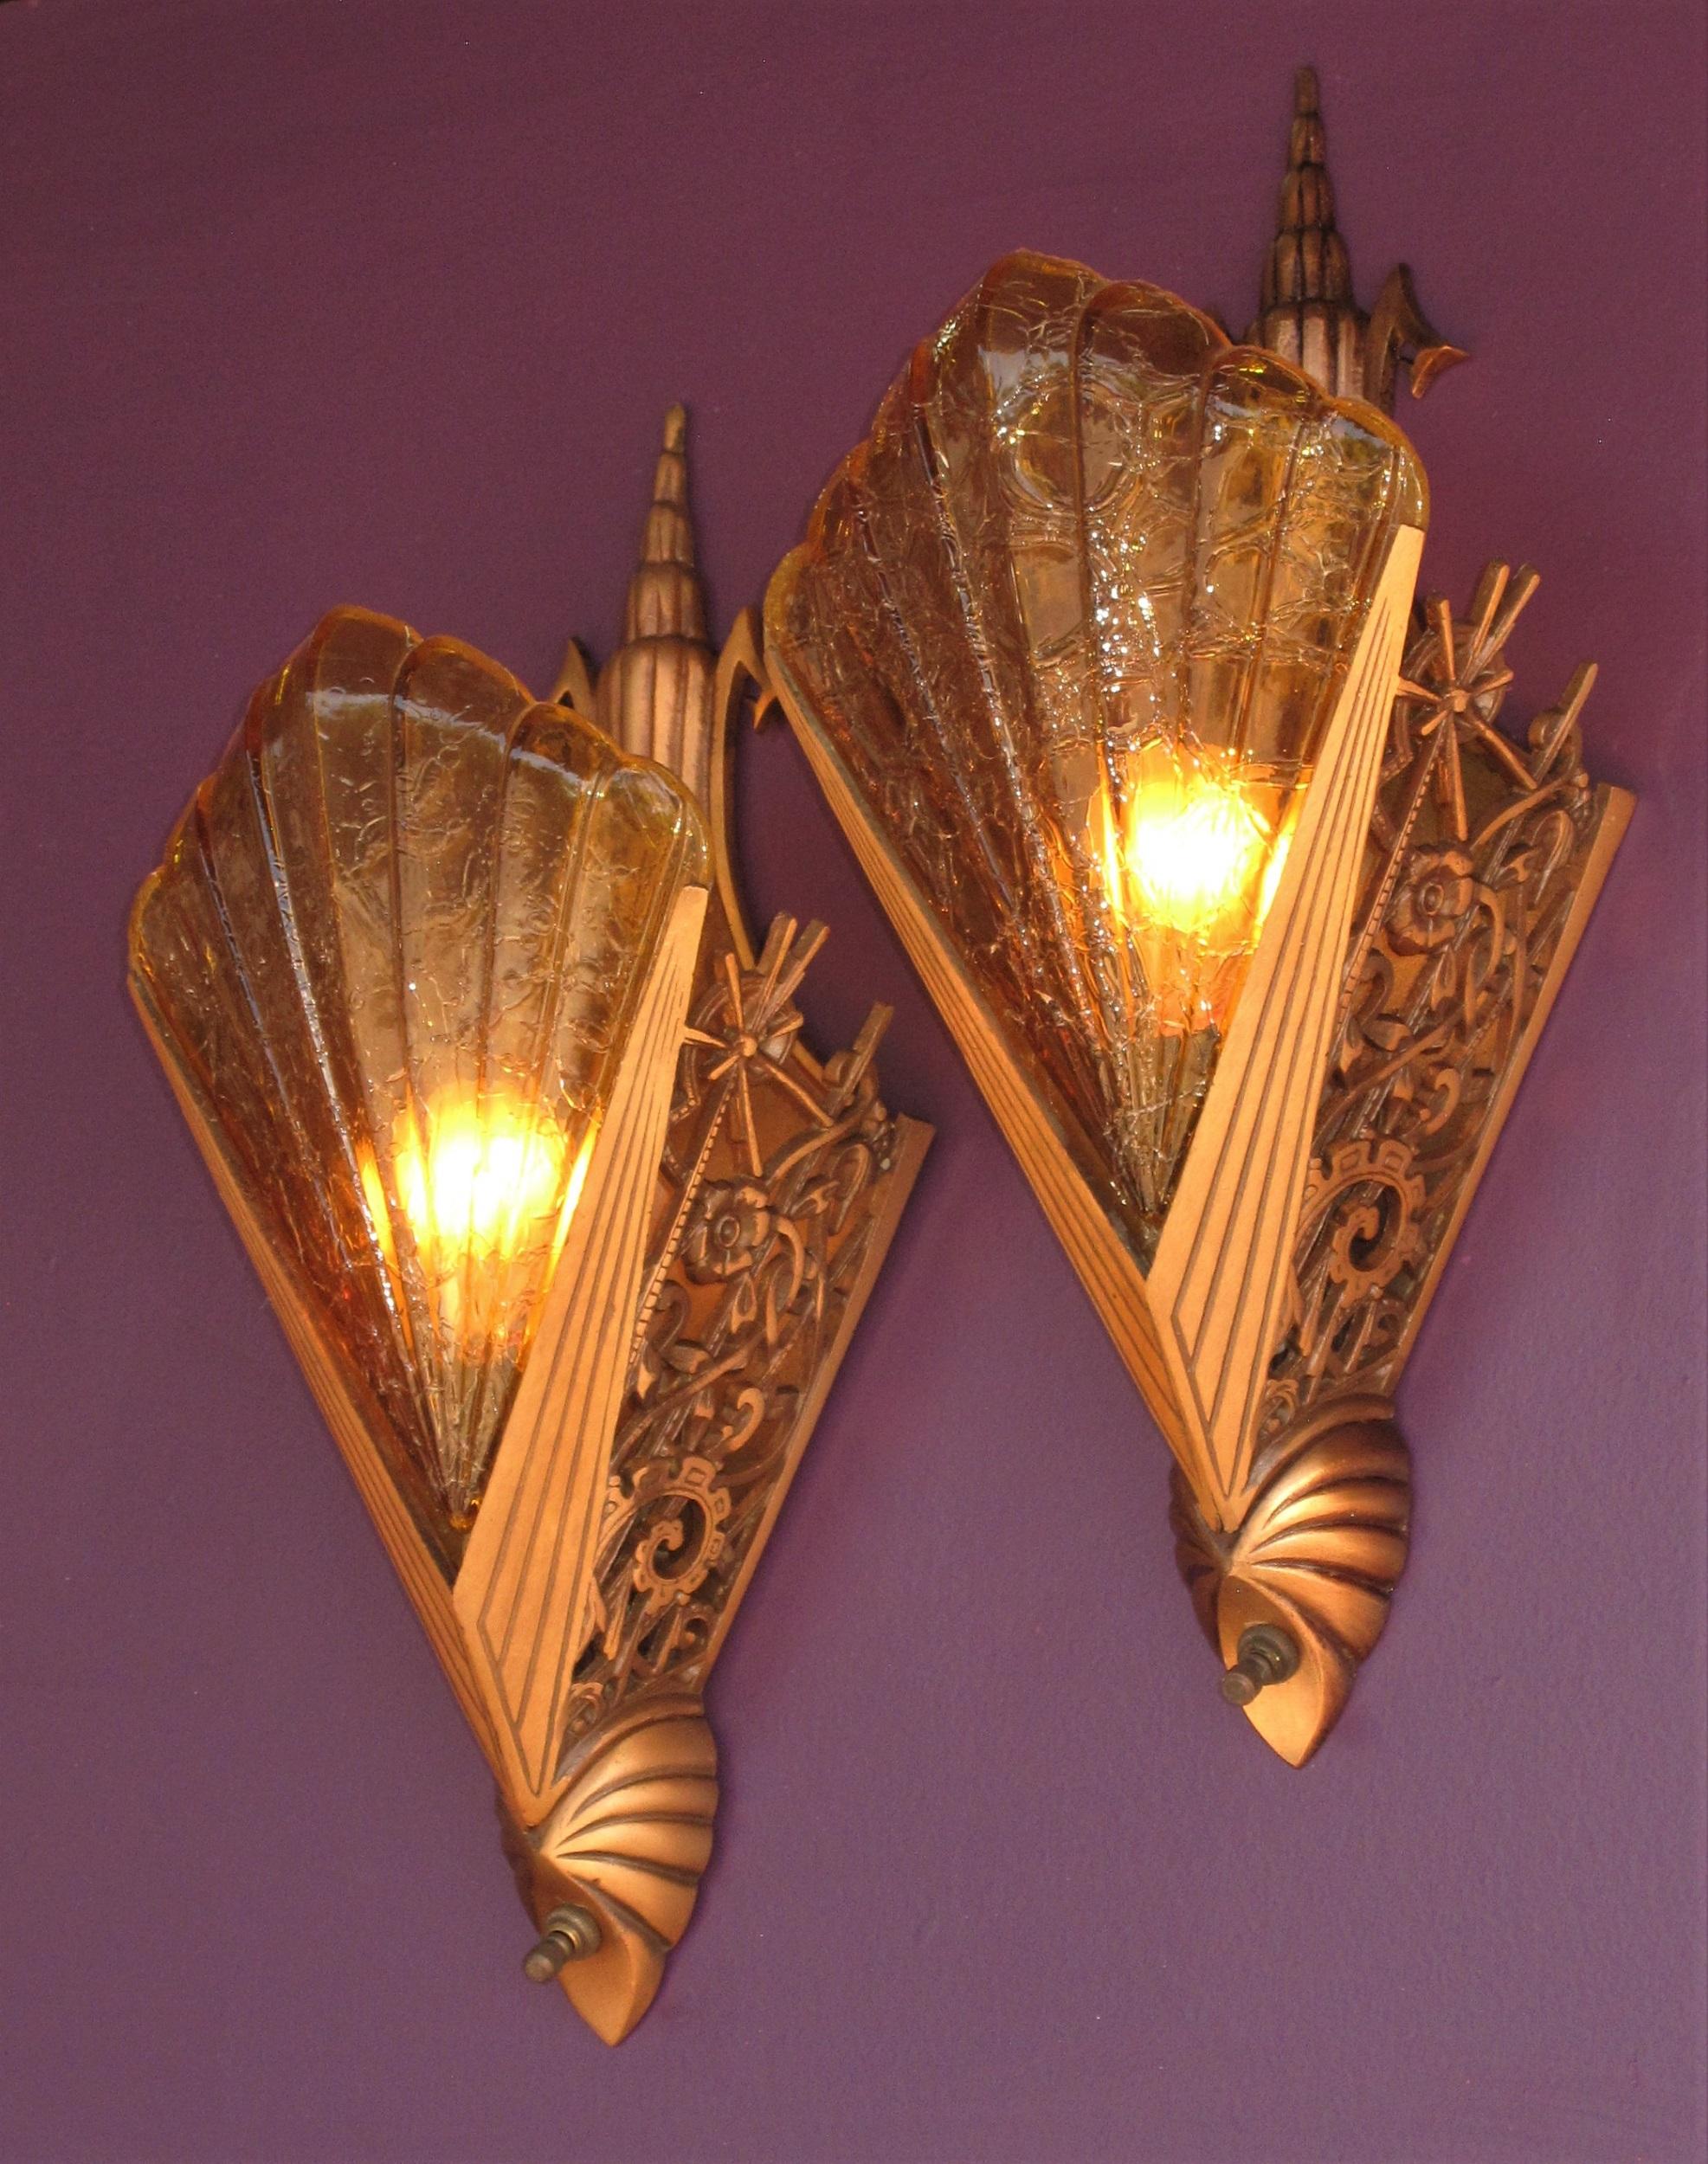 Ultra Deco 30s Pr Bronze Slip Shade Sconces w/ Honey colored shades priced pair For Sale 1